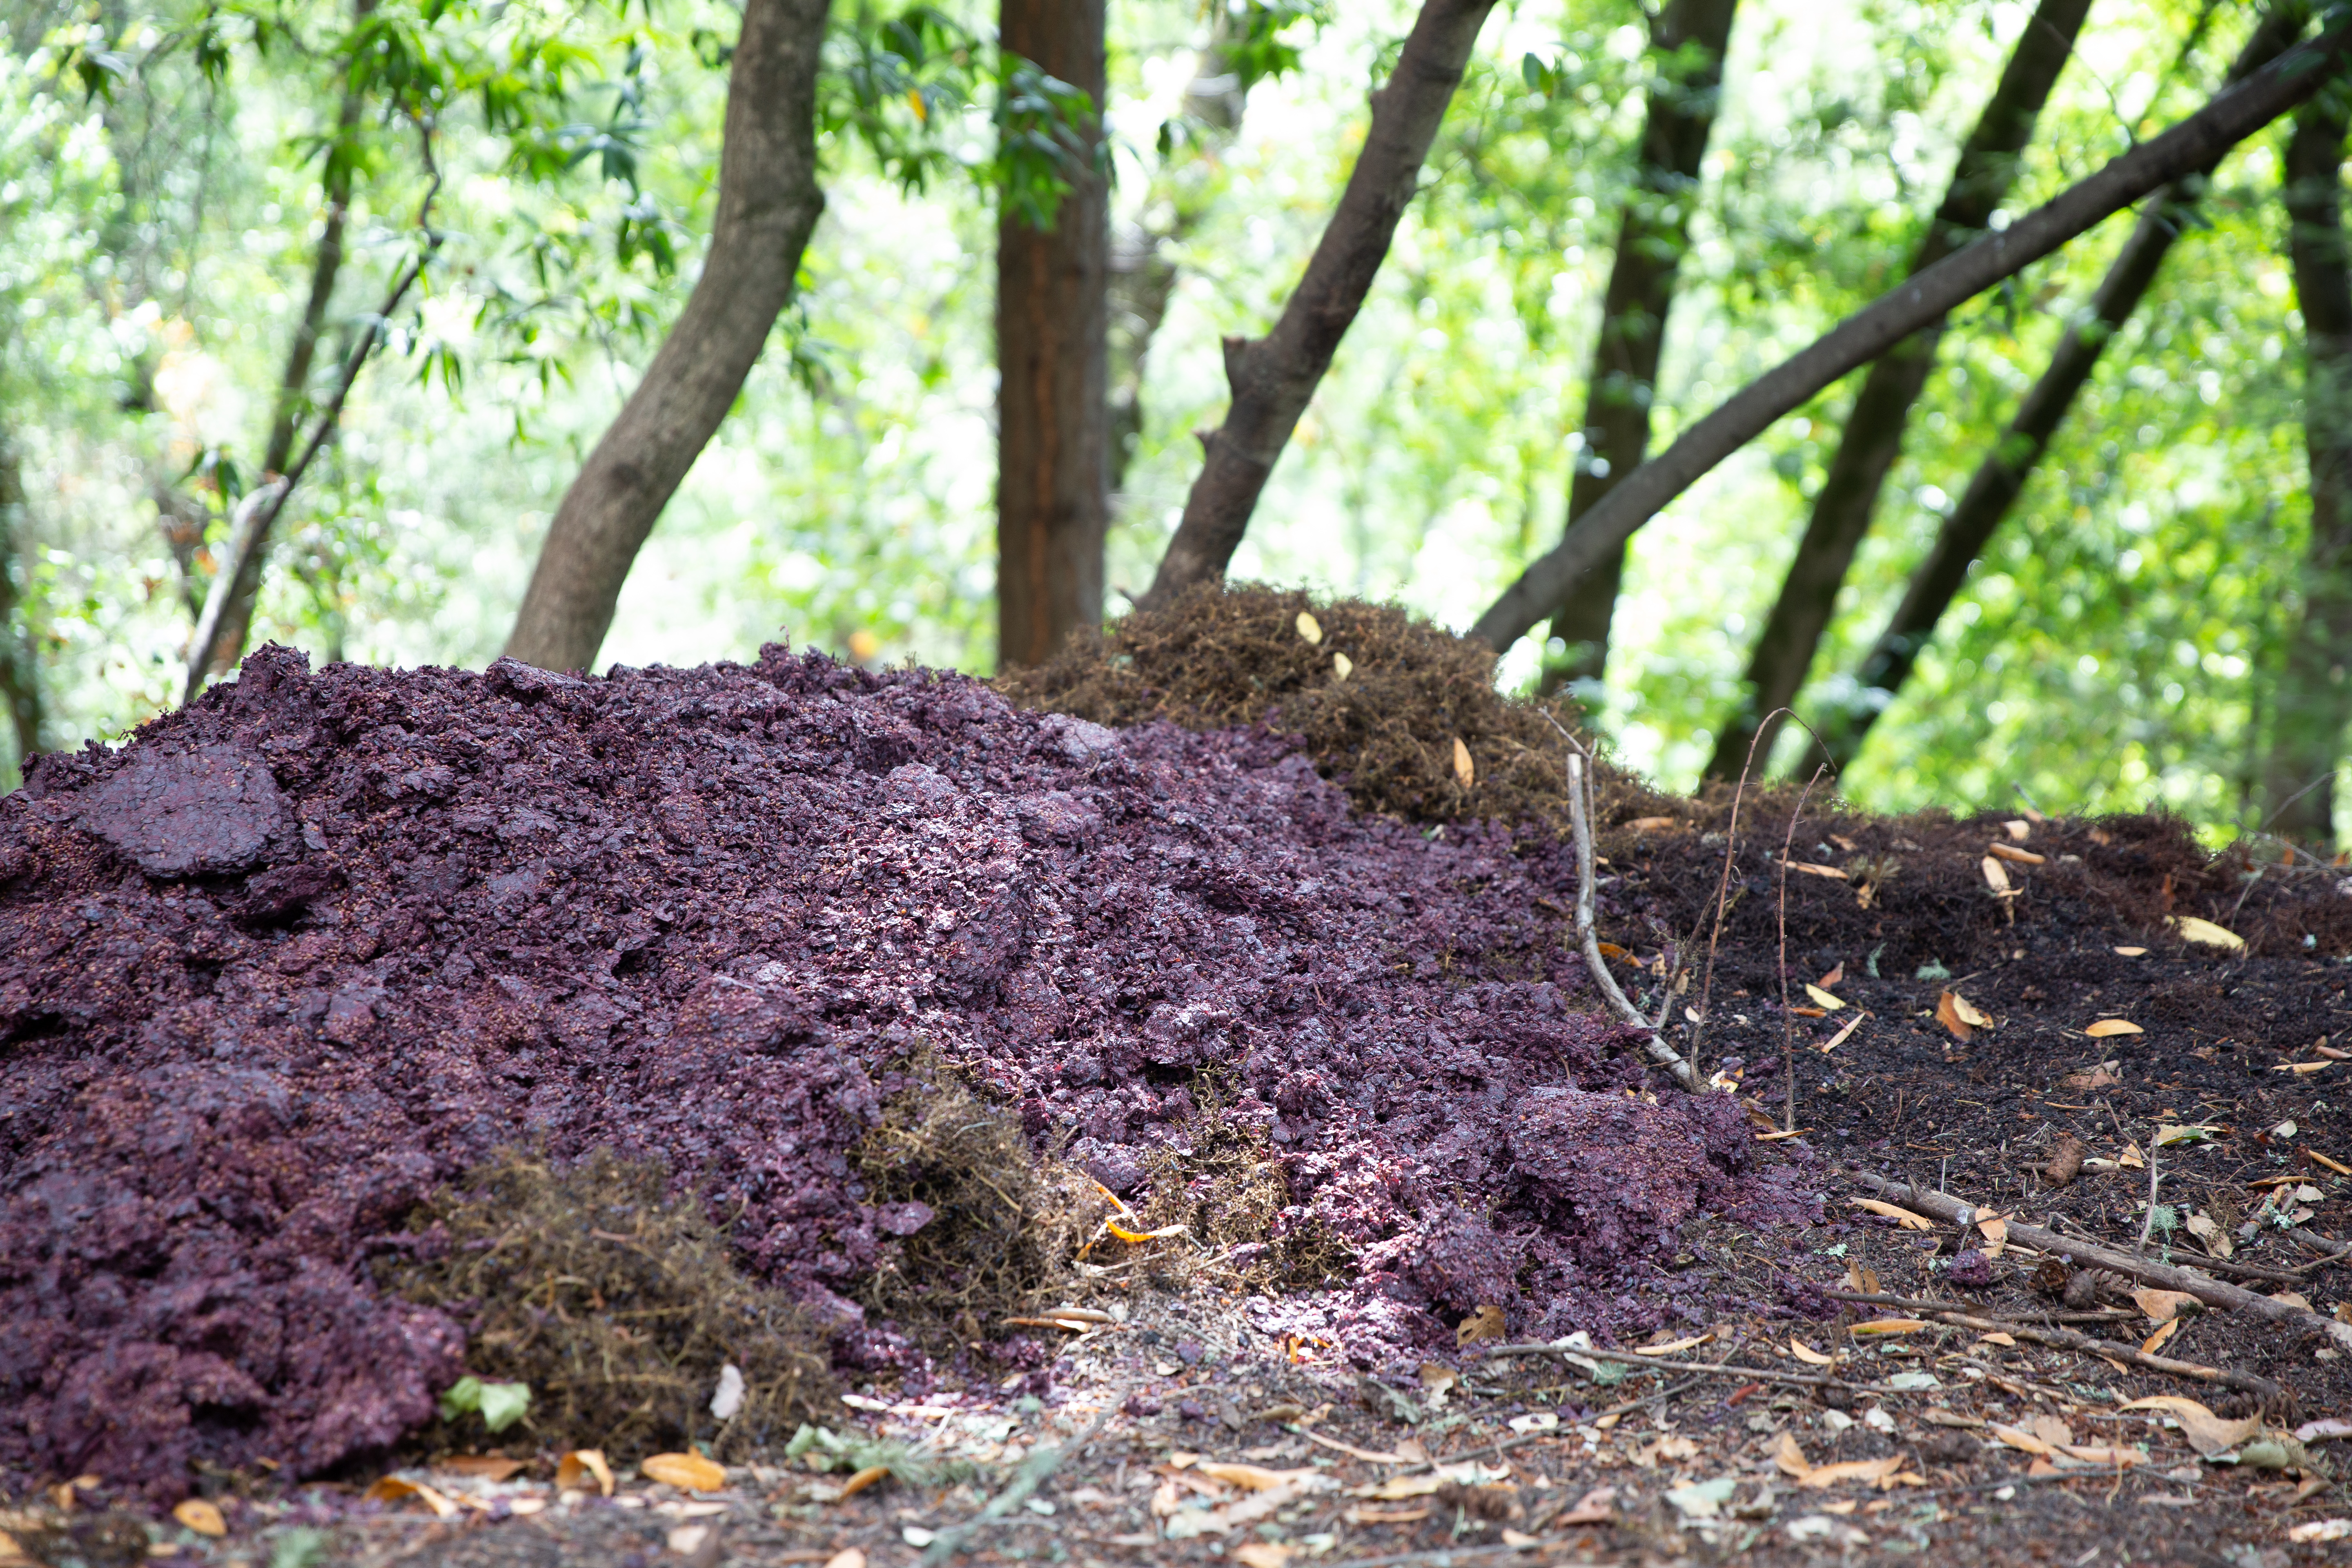 Composting the grape pomace (leftover stems, seeds, and skins)